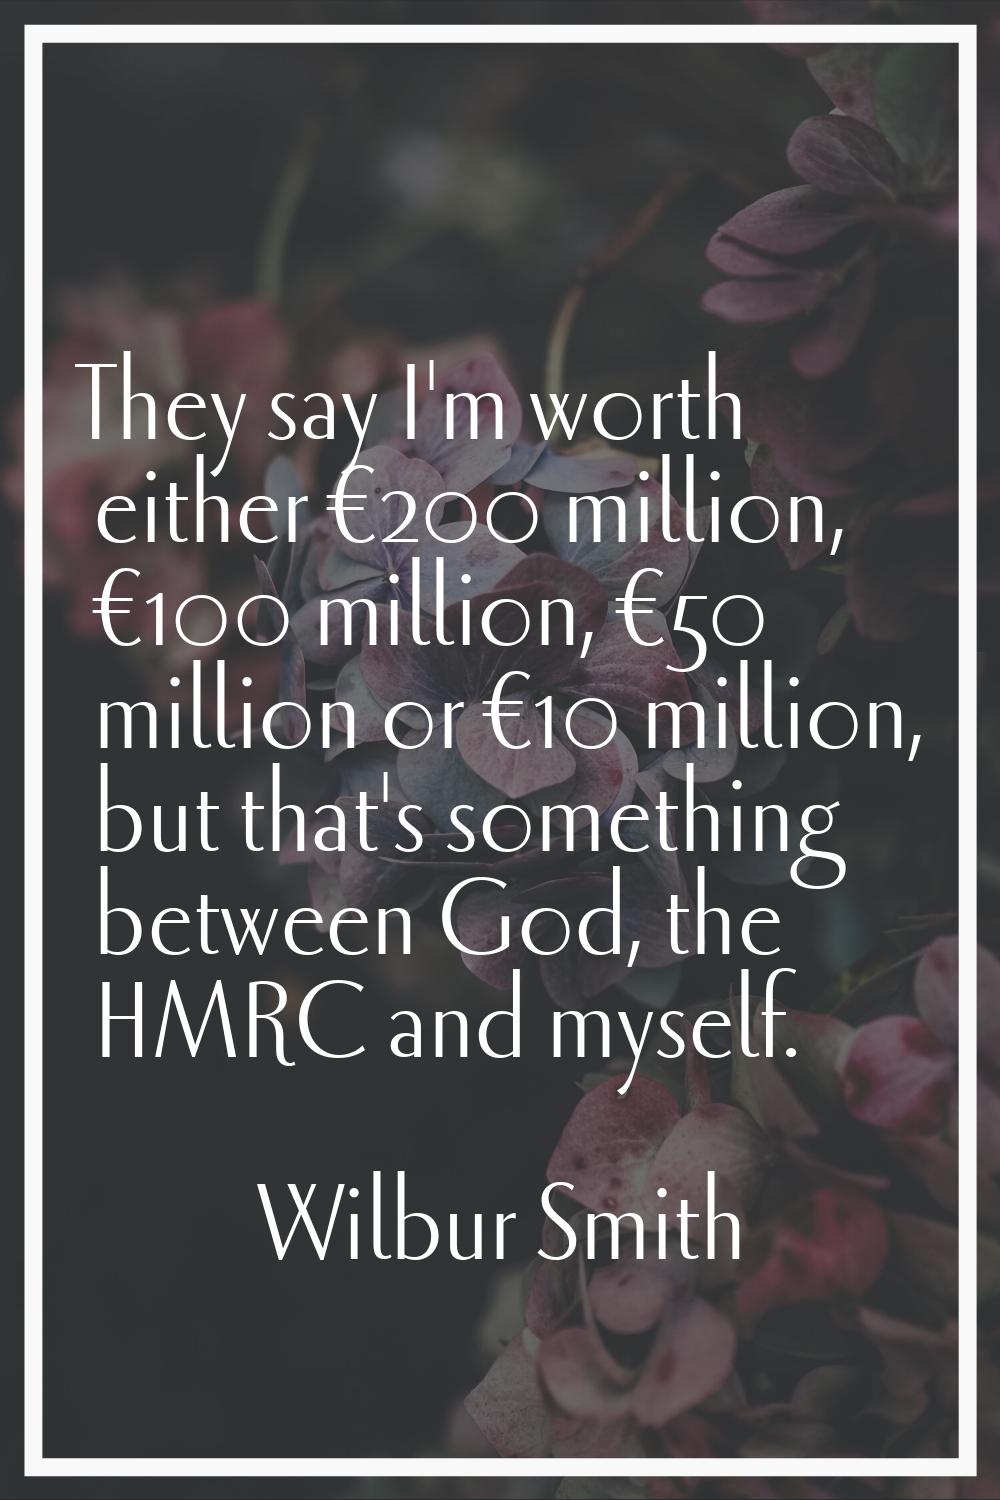 They say I'm worth either €200 million, €100 million, €50 million or €10 million, but that's someth